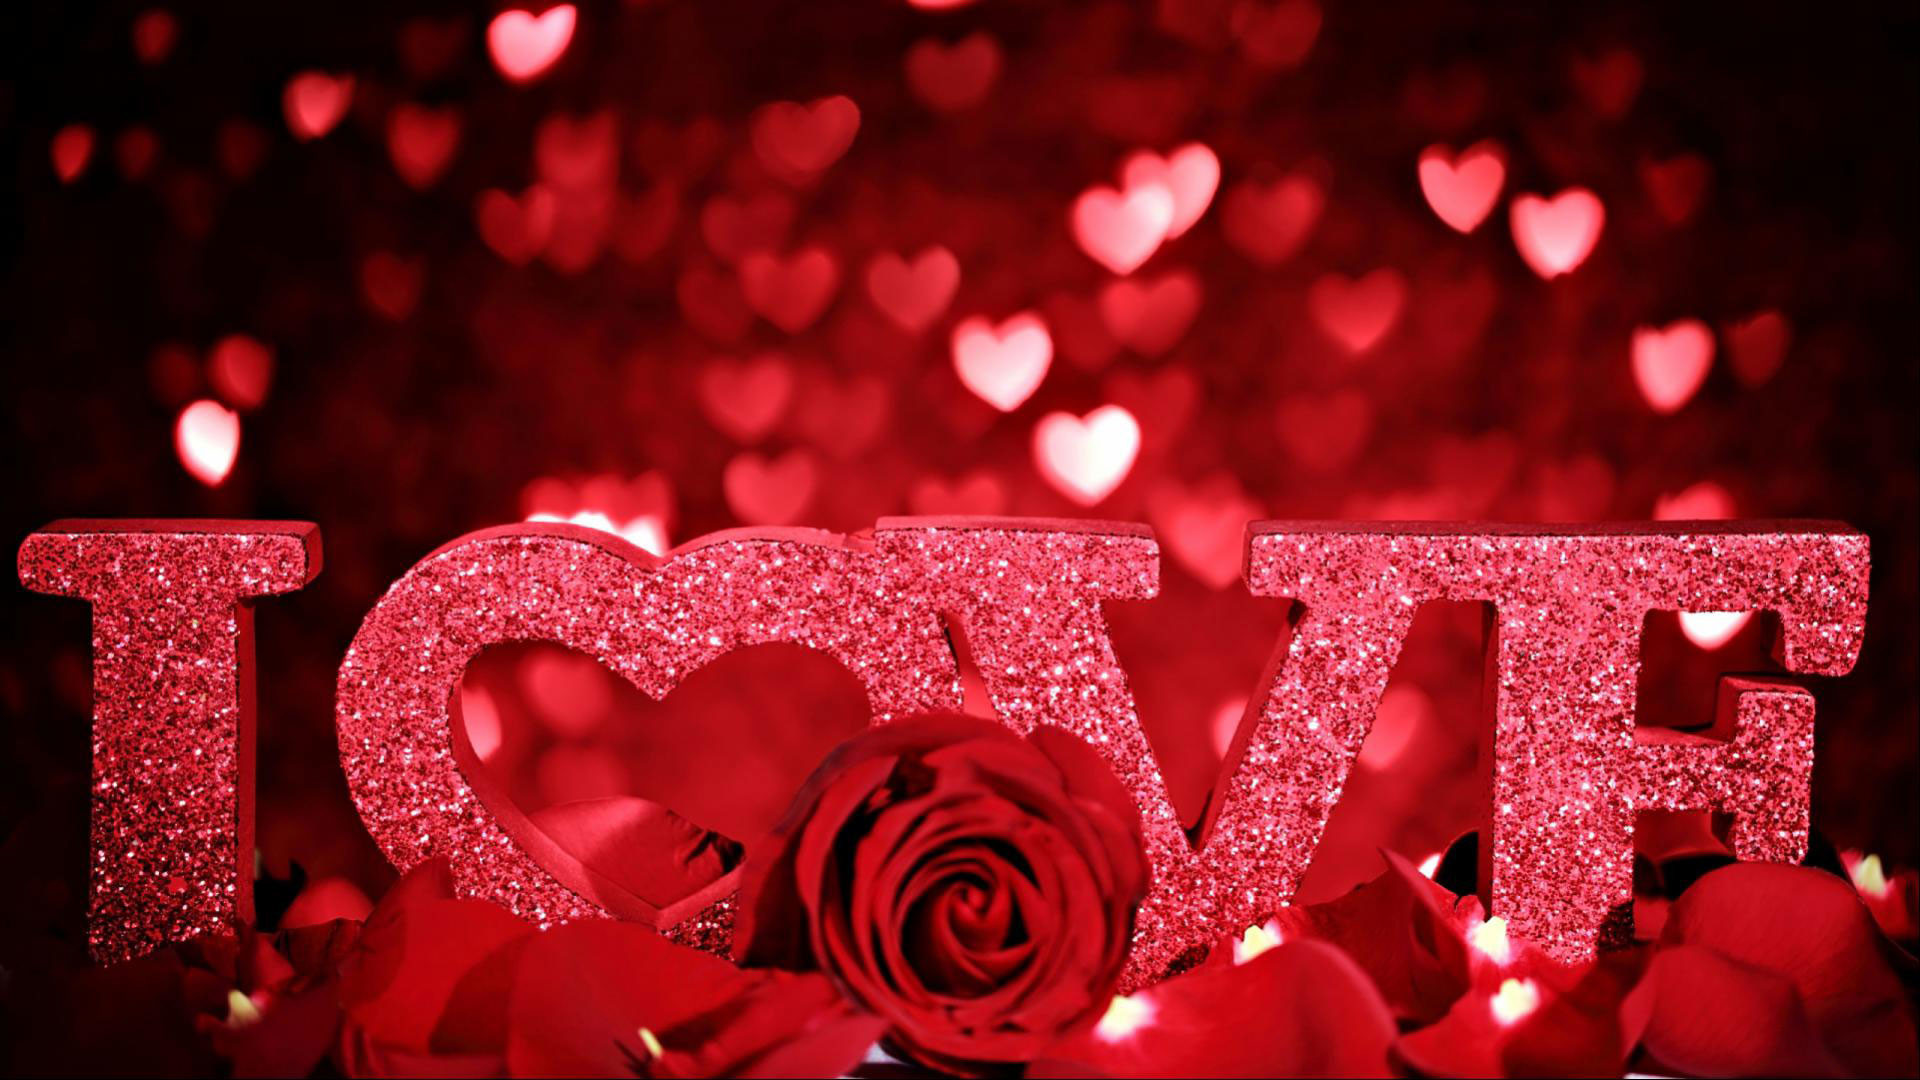 1920x1080 hd pics photos red love roses valentines day desktop background wallpaper